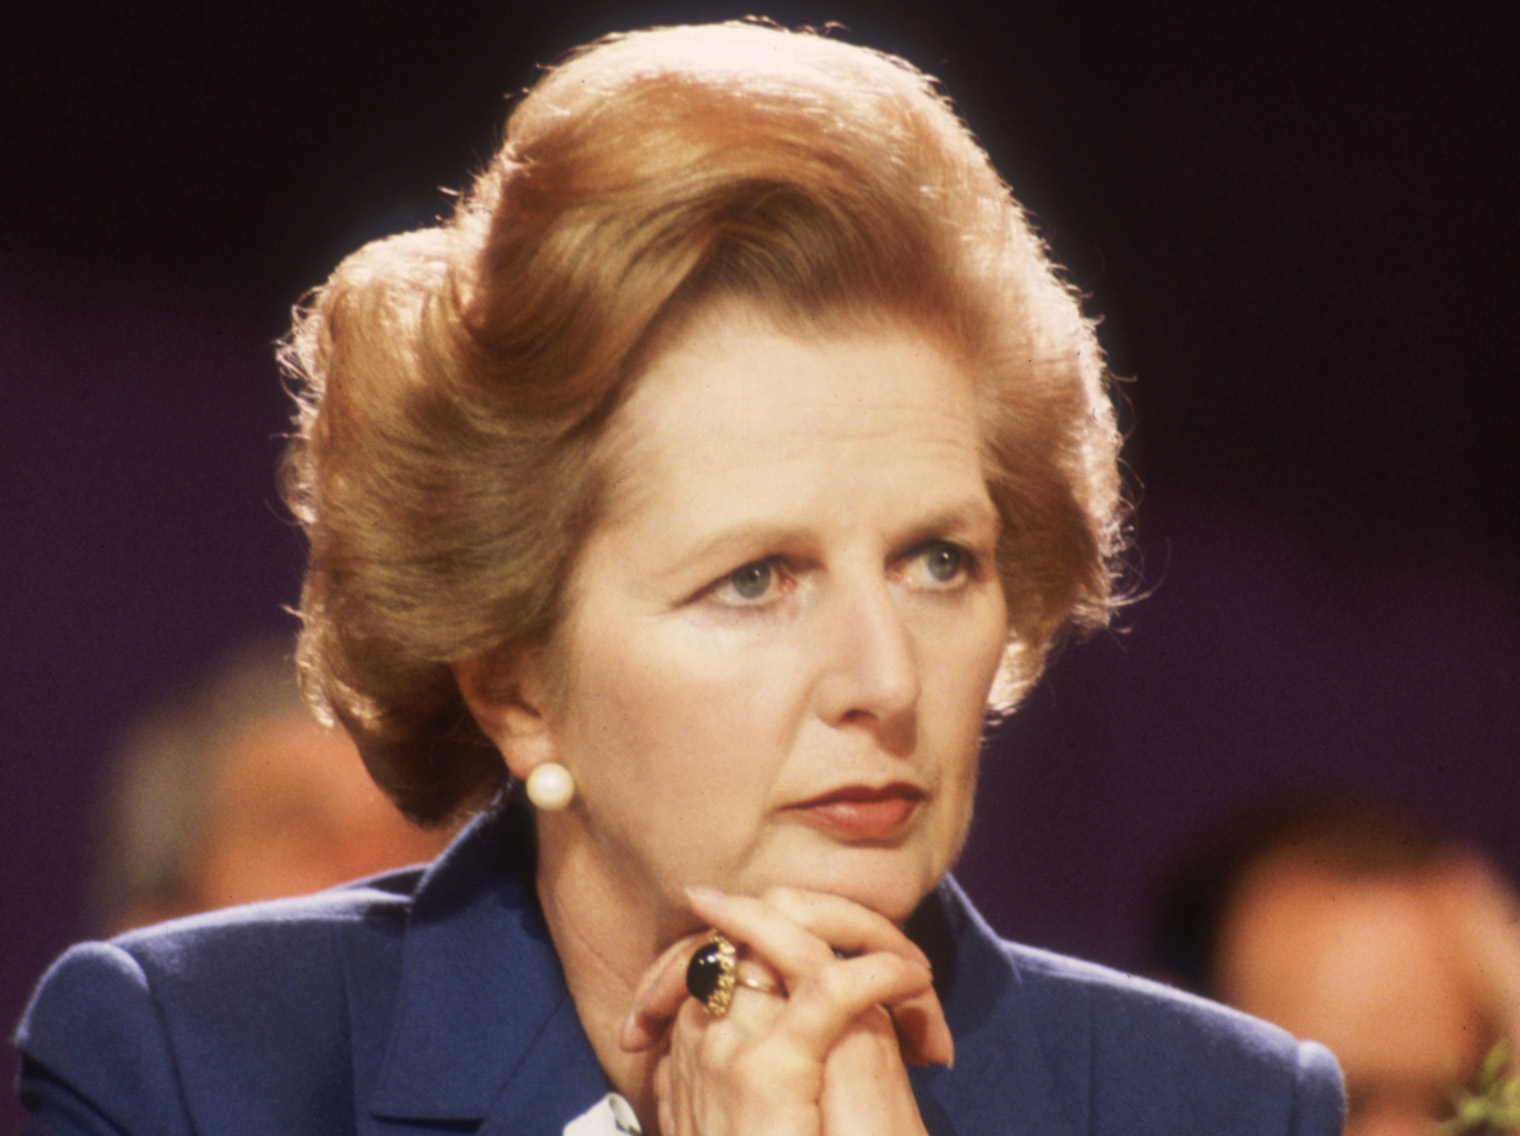 14th October 1981:  British Conservative politician and first woman to hold the office of Prime Minister of Great Britain Margaret Thatcher at the Tory Party Conference in Blackpool.  (Photo by Hulton Archive/Getty Images)